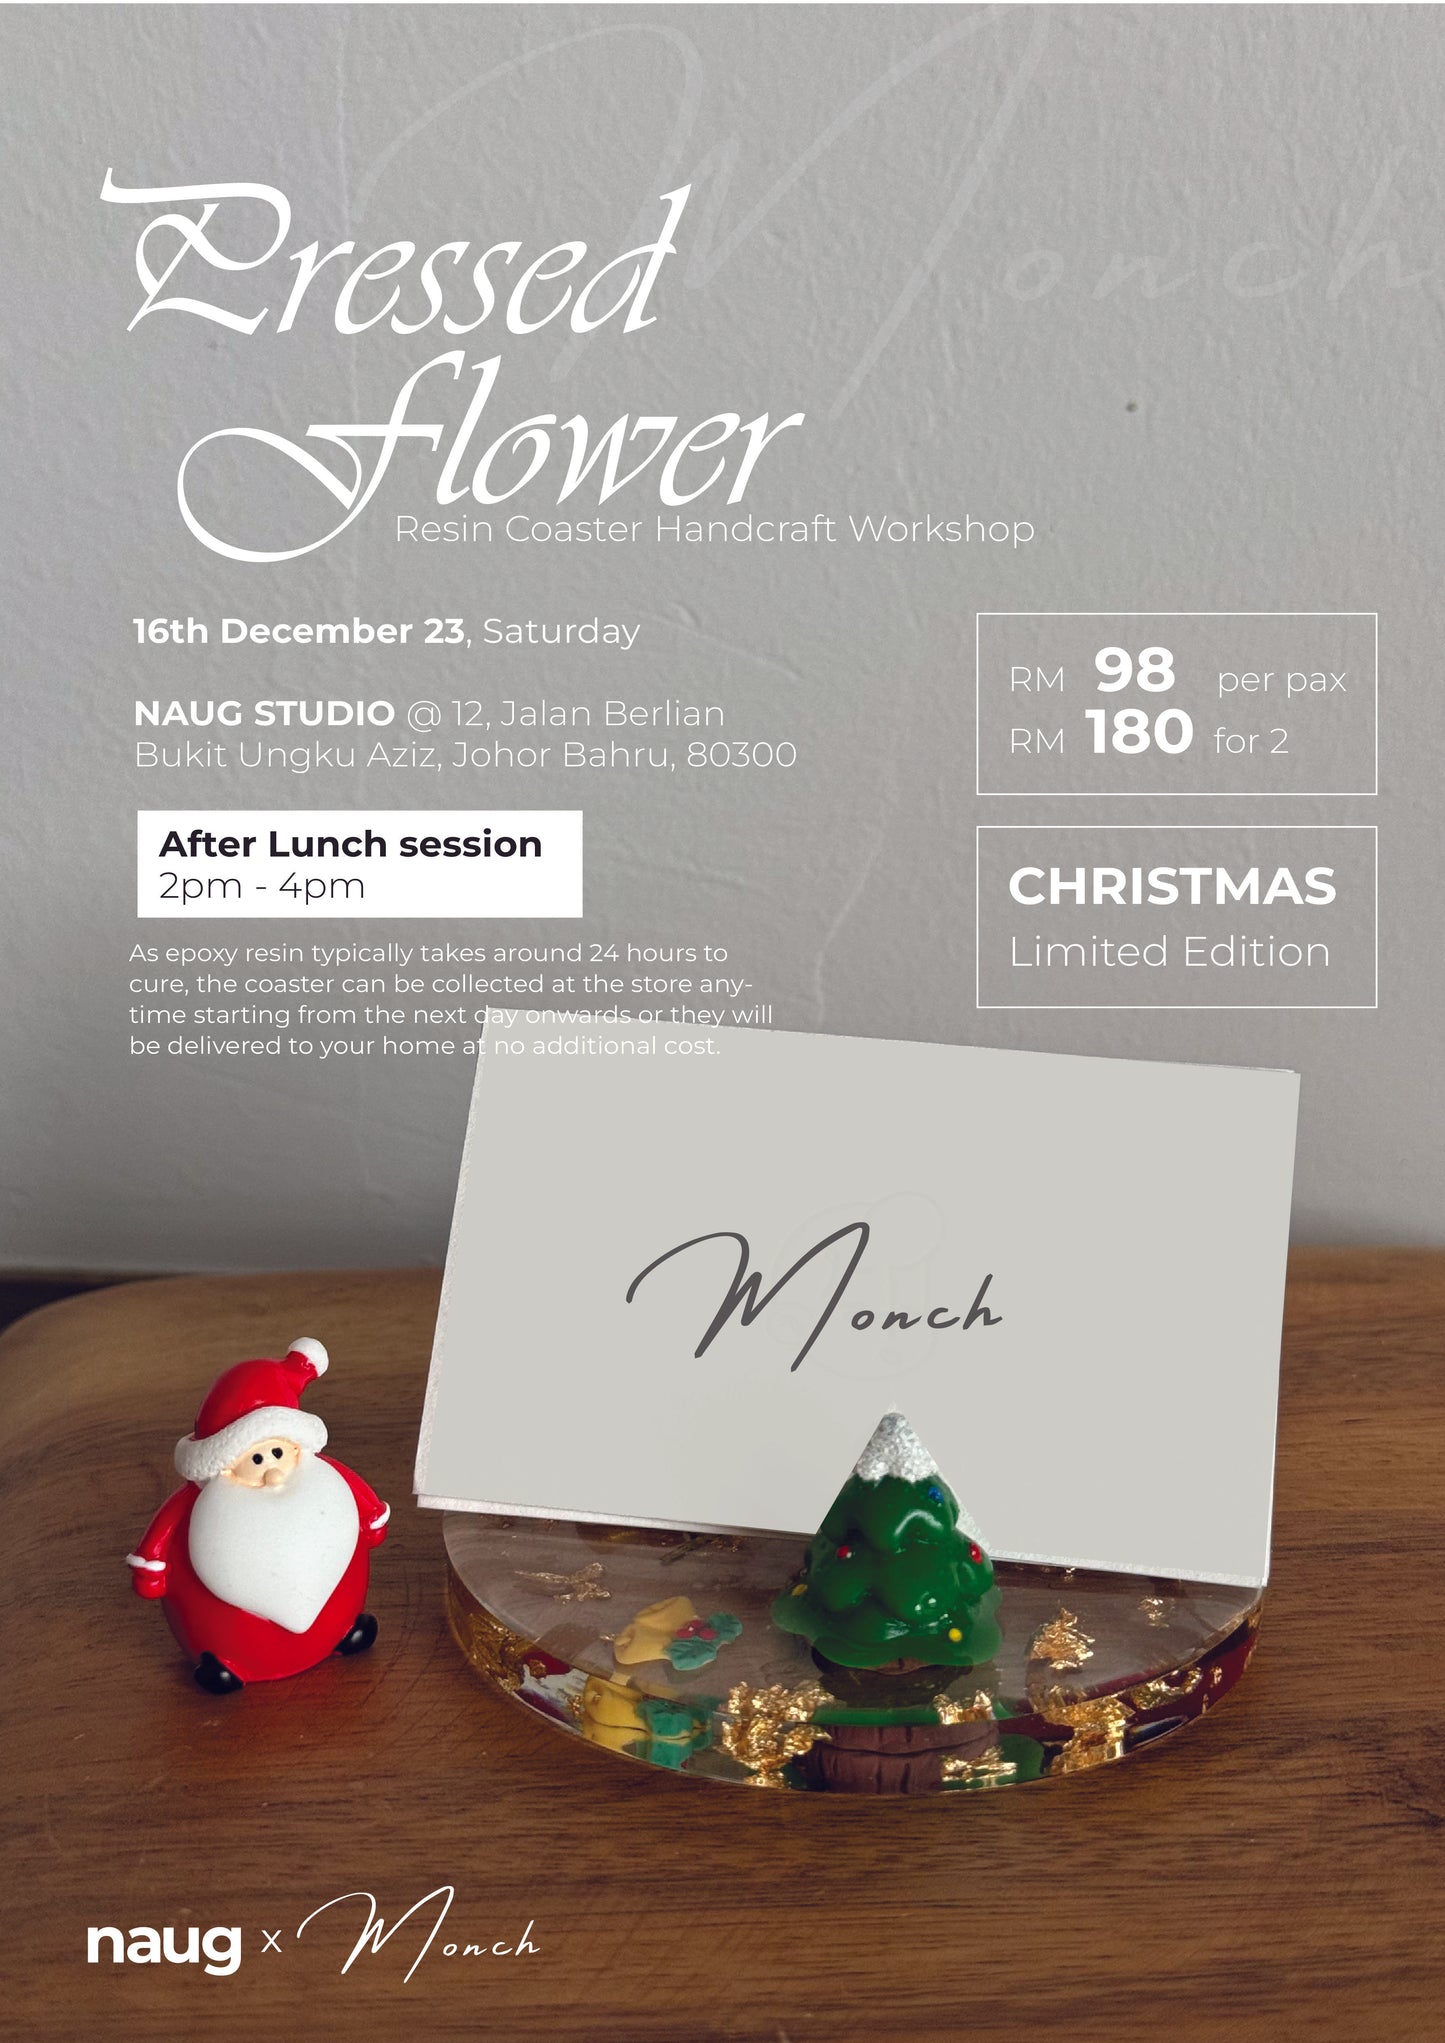 [16th DEC] [Christmas Edition] Pressed Flower Resin Coaster Workshop by MONCH STUDIO